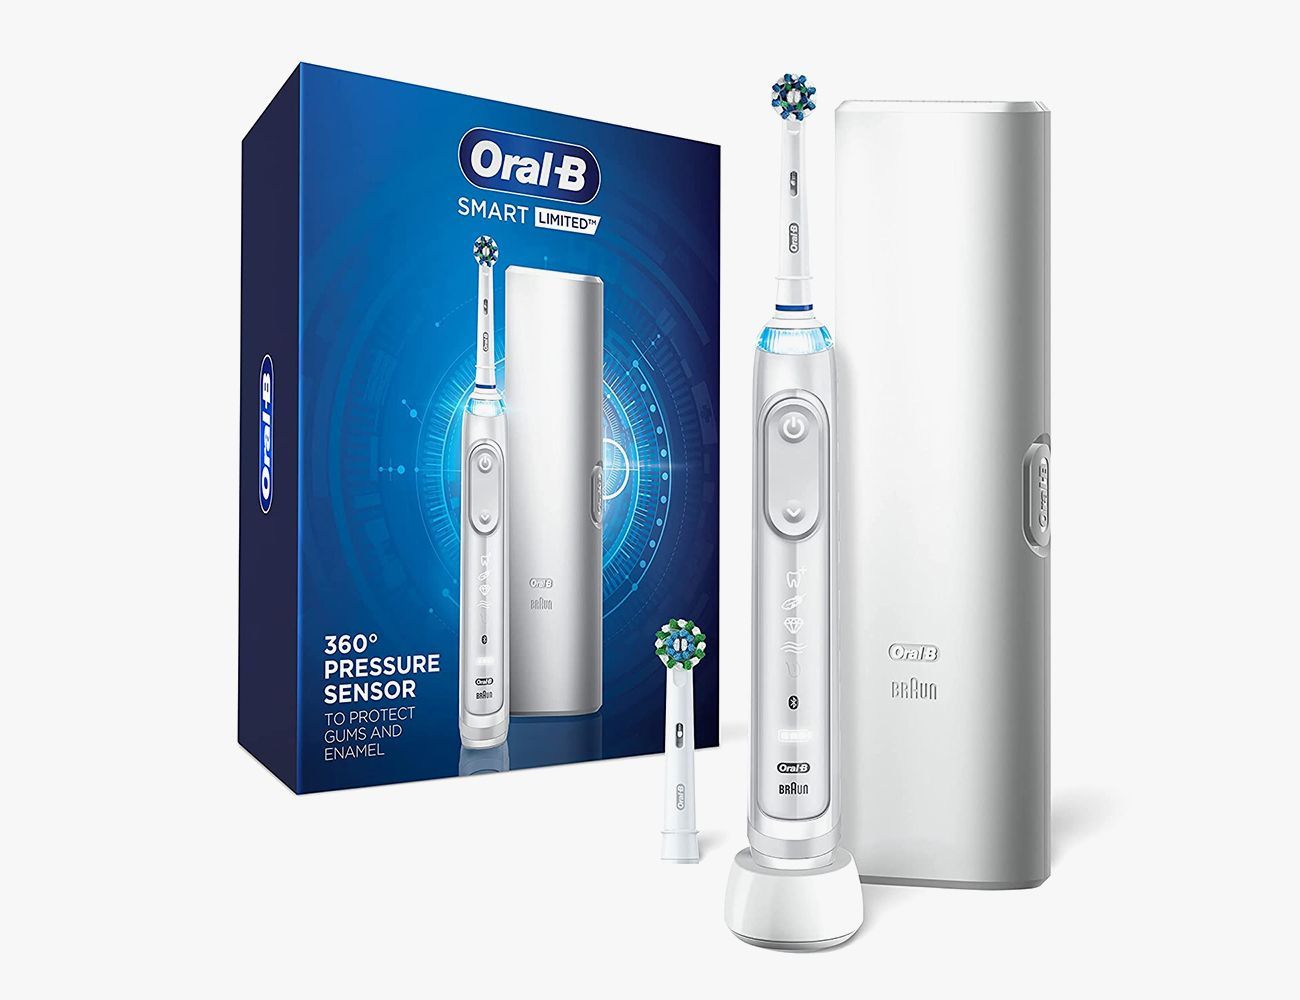 oral-b-electric-toothbrush-comparison-discount-clearance-save-42